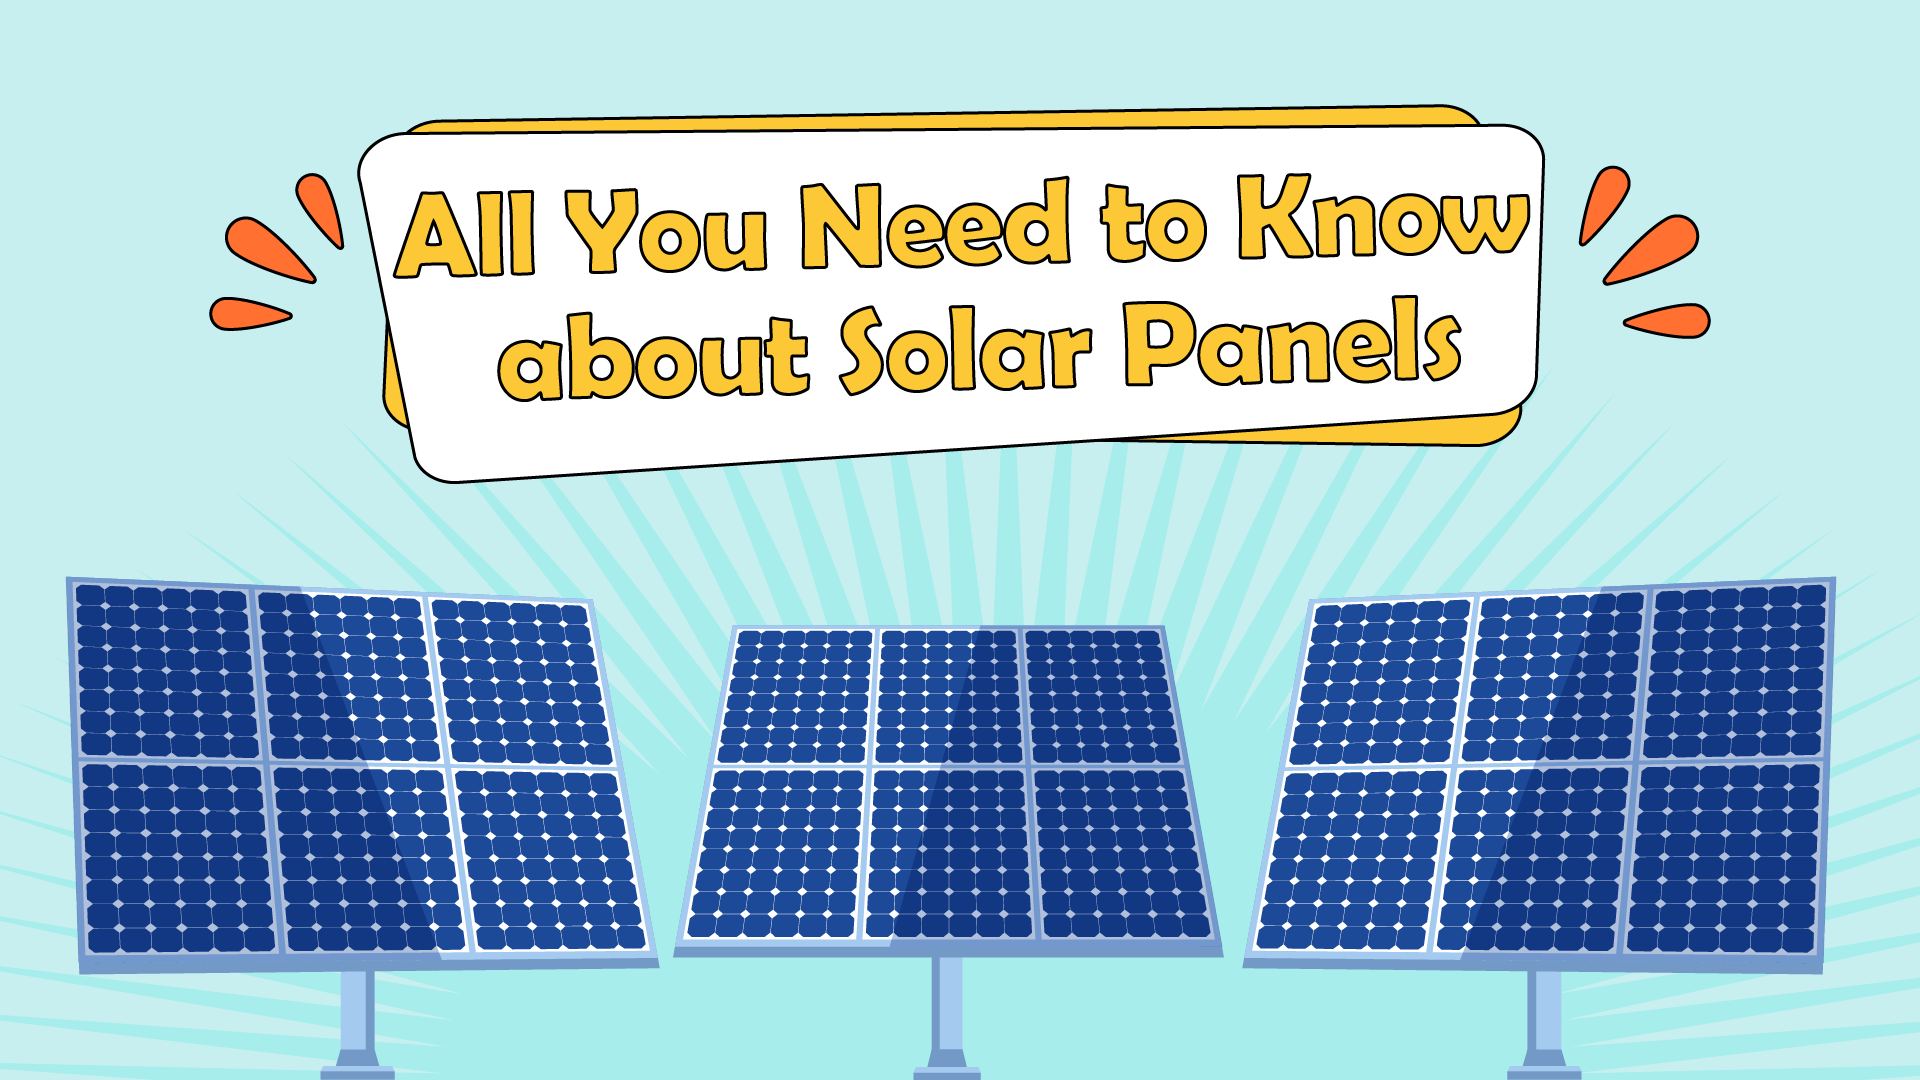 All You need to Know about Solar Panels